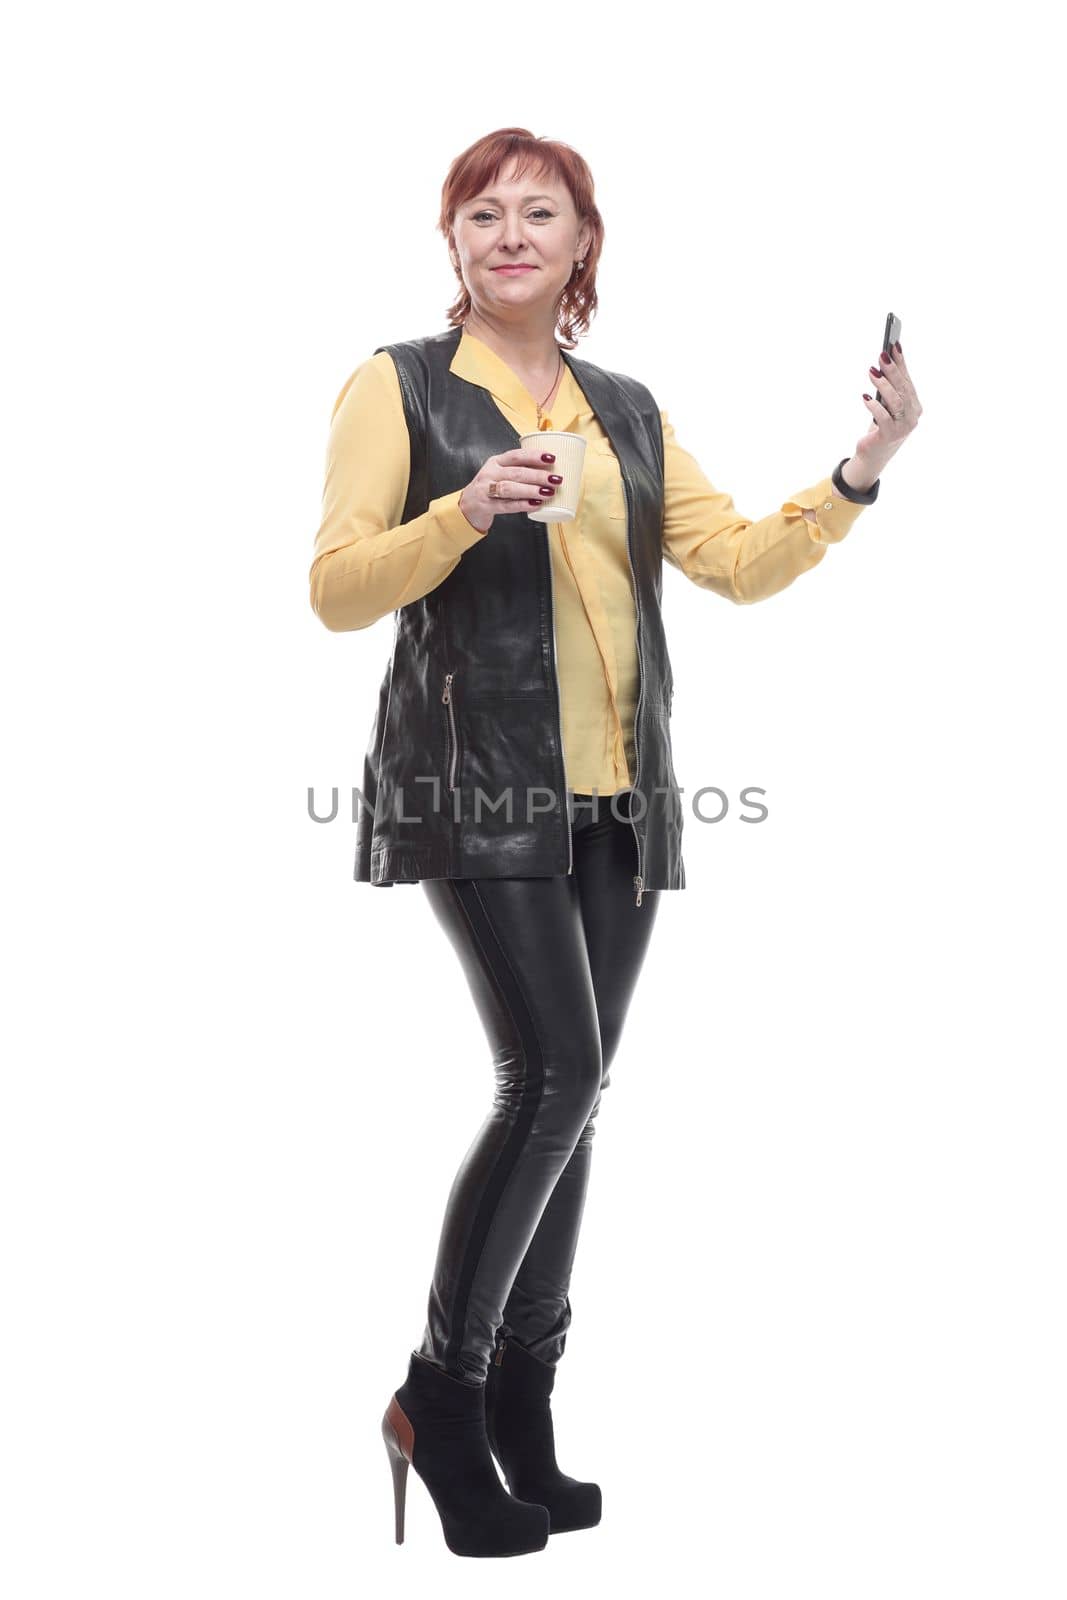 mature woman with smartphone and coffee to take away . isolated on a white background.